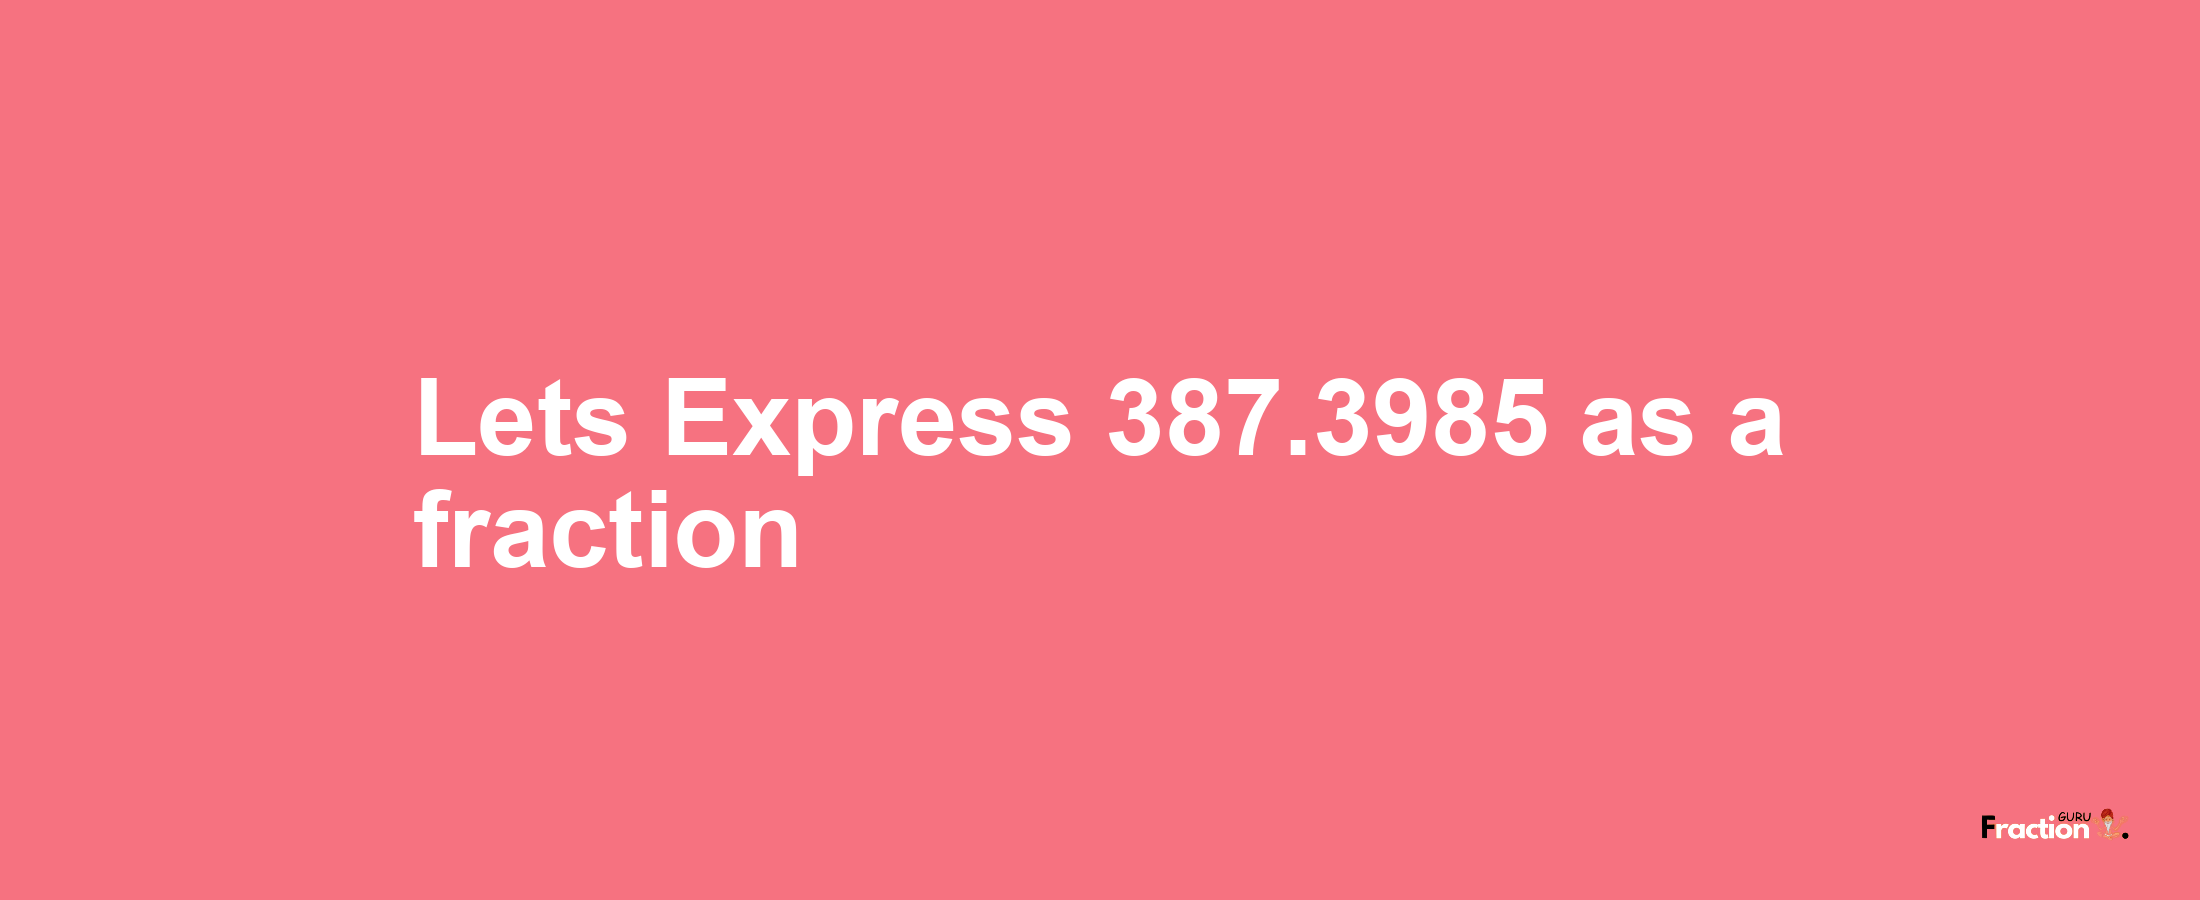 Lets Express 387.3985 as afraction